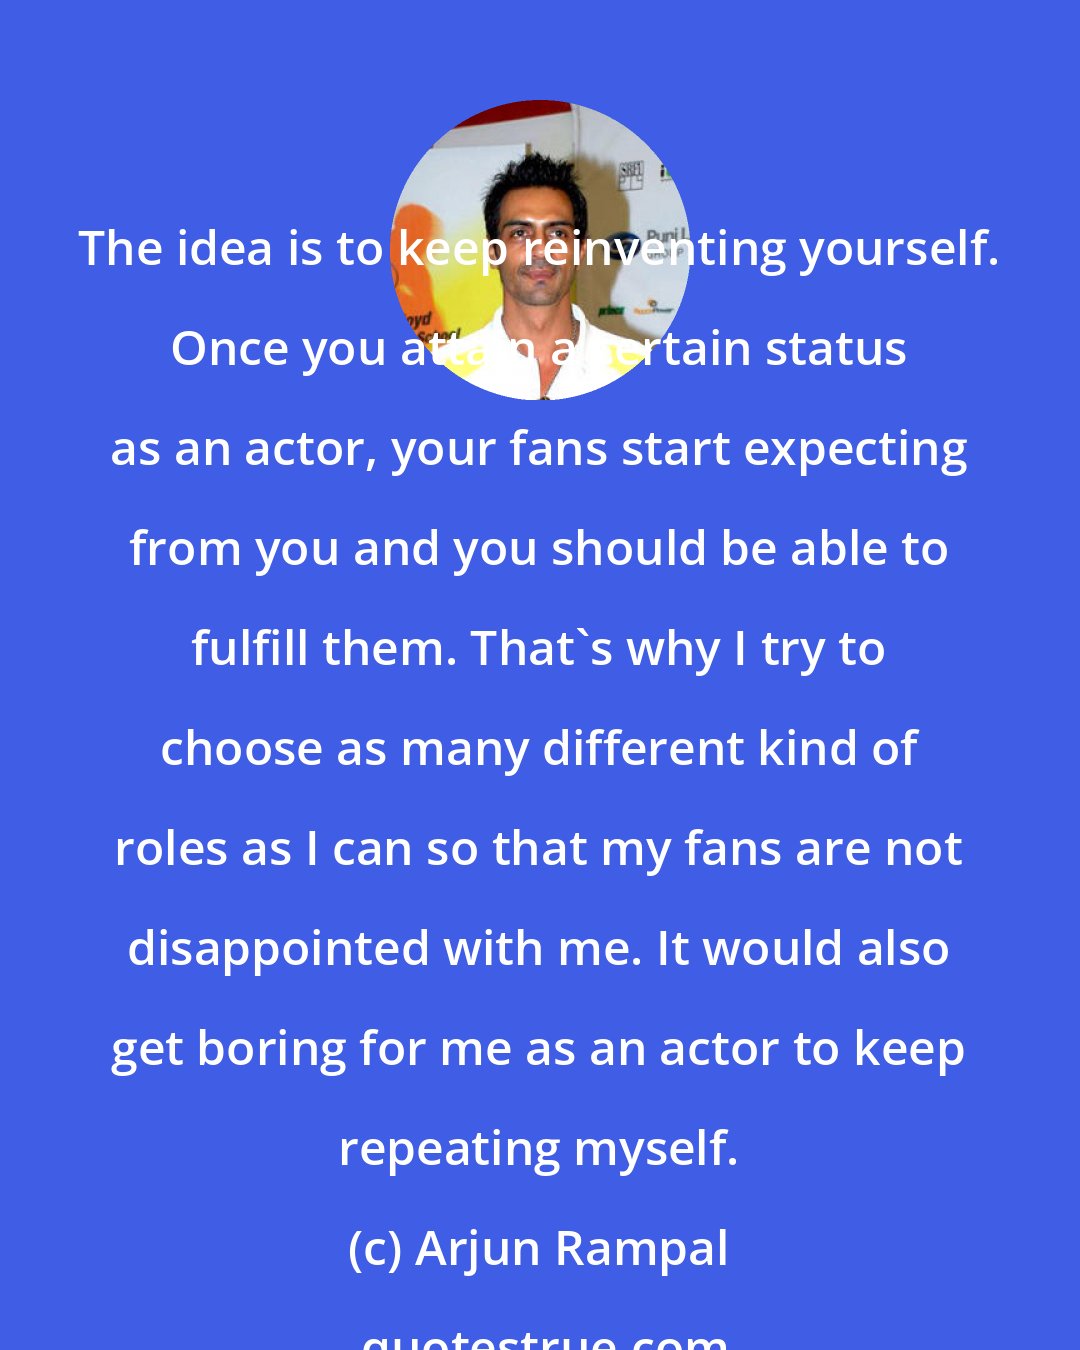 Arjun Rampal: The idea is to keep reinventing yourself. Once you attain a certain status as an actor, your fans start expecting from you and you should be able to fulfill them. That's why I try to choose as many different kind of roles as I can so that my fans are not disappointed with me. It would also get boring for me as an actor to keep repeating myself.